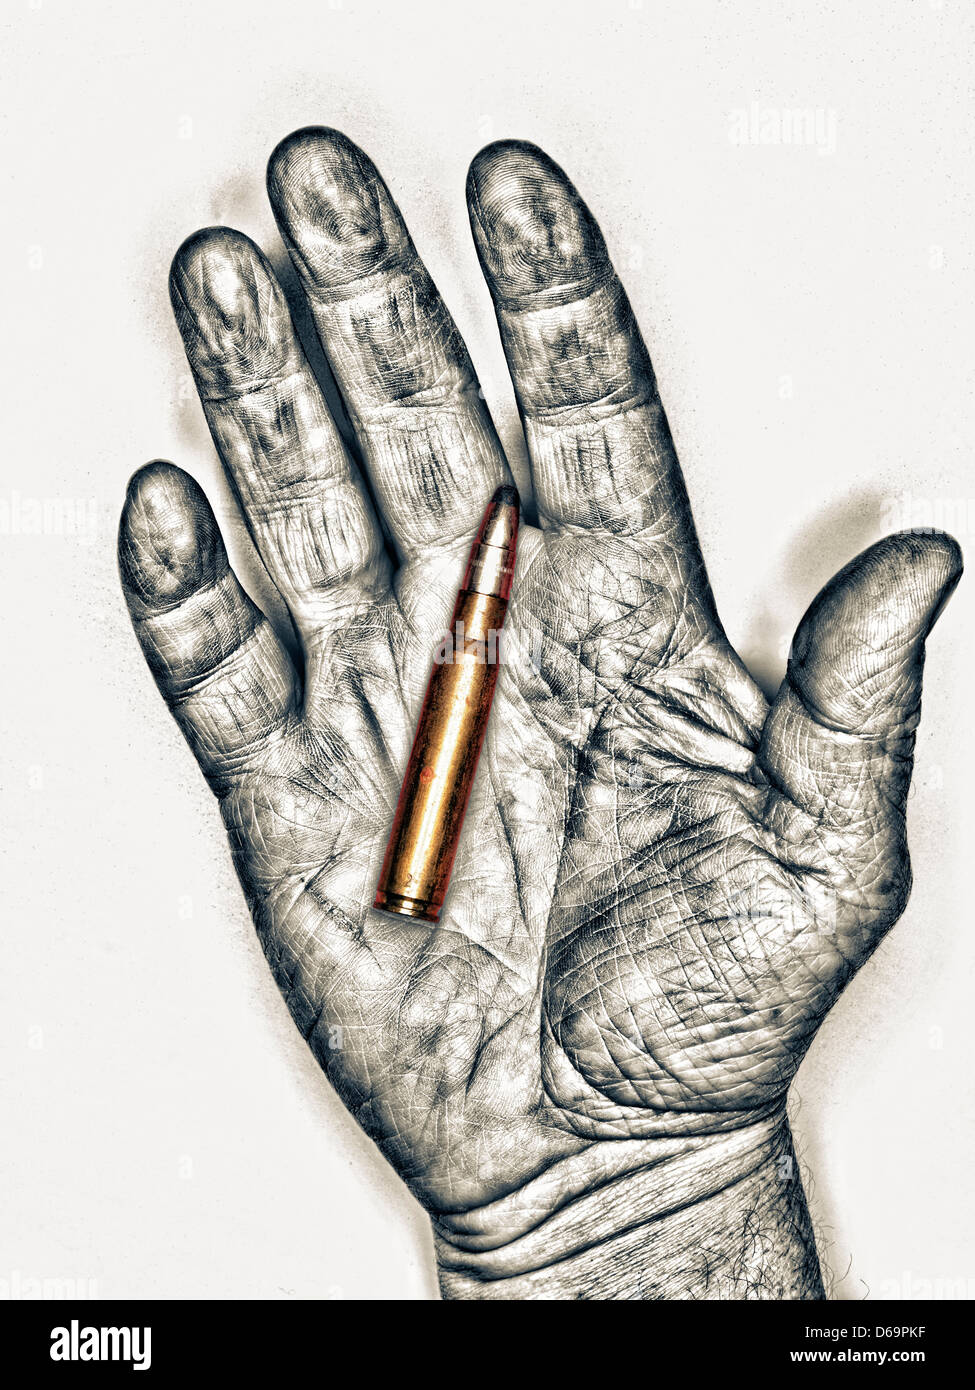 Black and white hand holding bullet Stock Photo